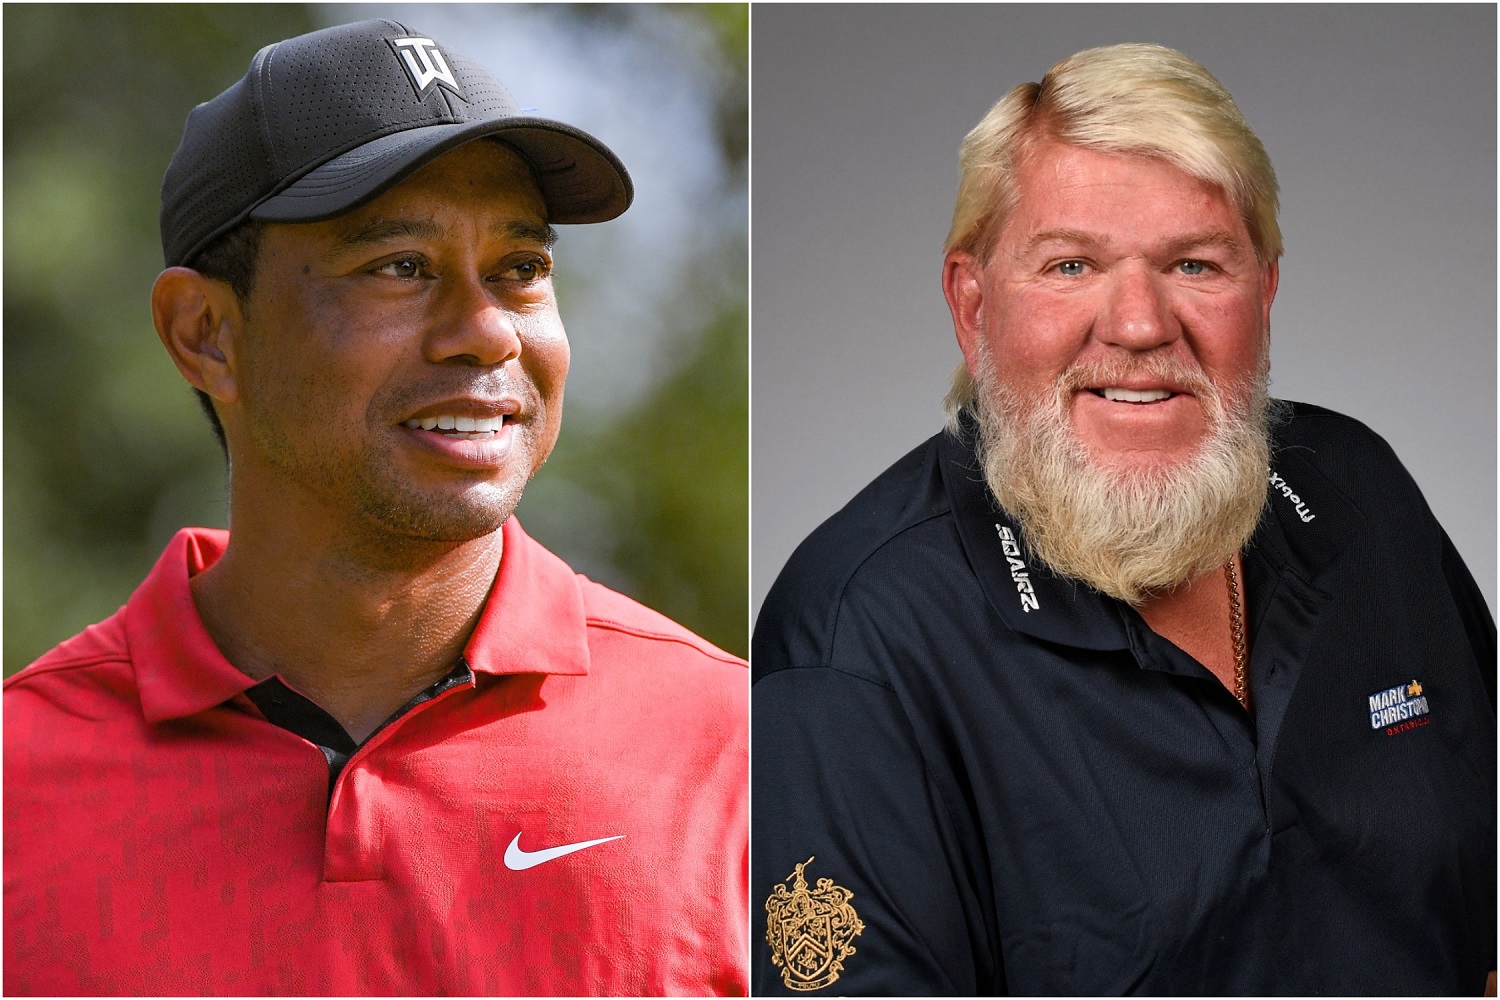 Tiger Woods and John Daly are two of the best-known golfers of their generation.